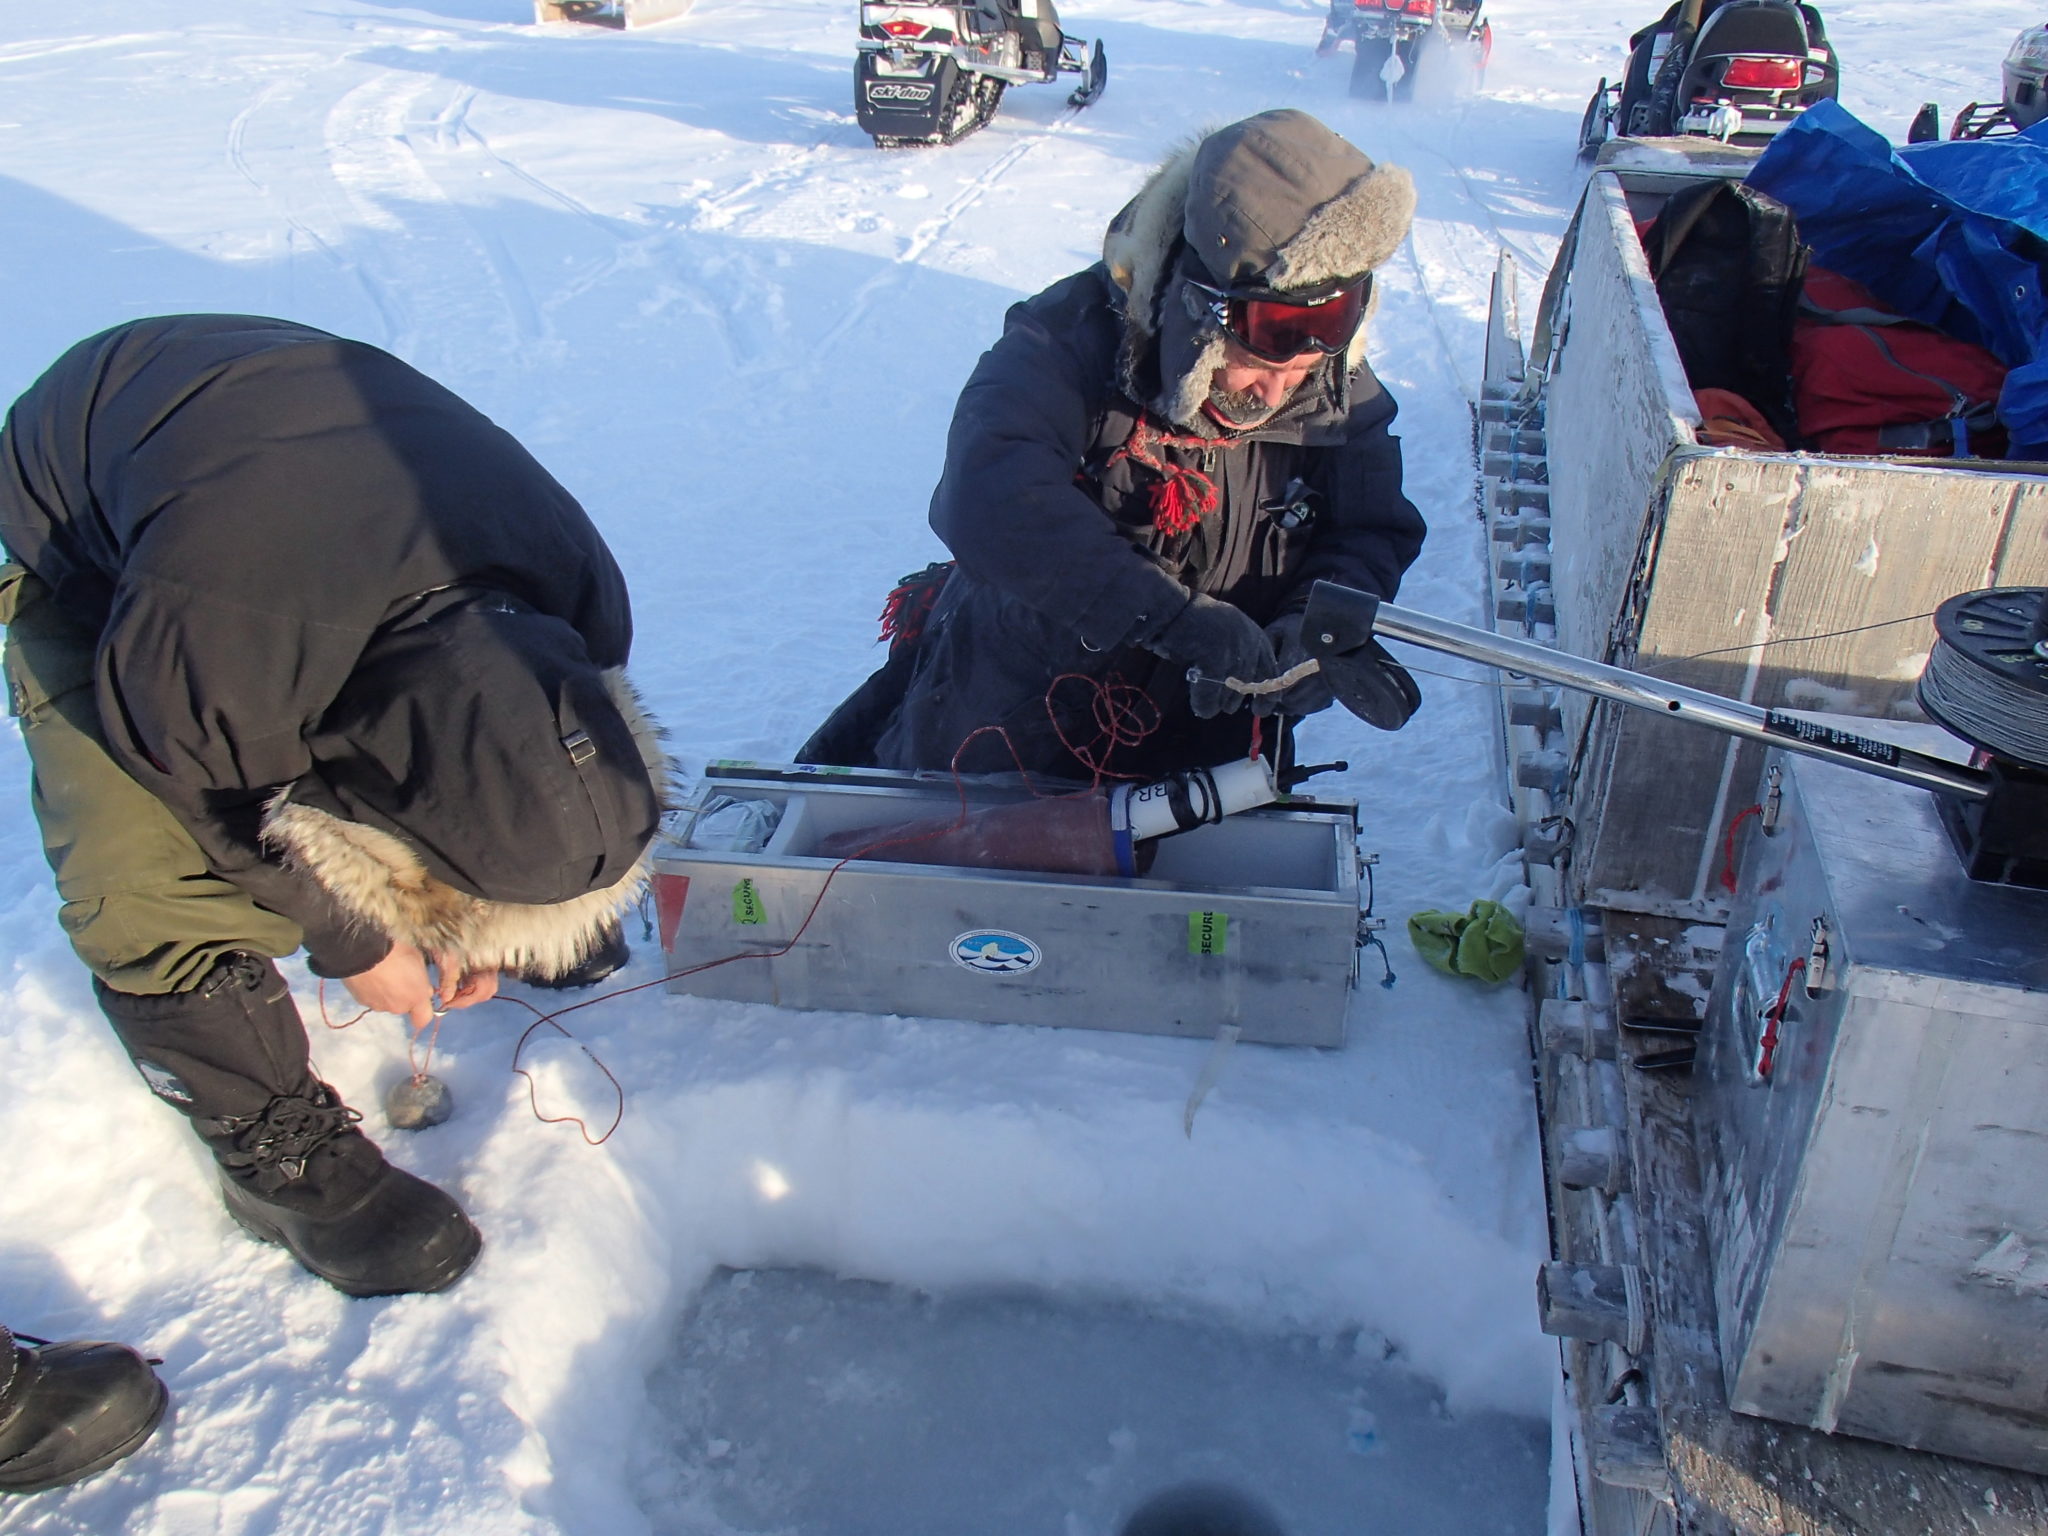 CANADIAN RANGERS TIE AN RBRCONCERTO CTD TO A DOWNRIGGER LINE, TAKING THE CTD OUT OF ITS SACK AND ALUMINUM BOX WHERE CHEMICAL HAND WARMERS KEEP IT WARM.